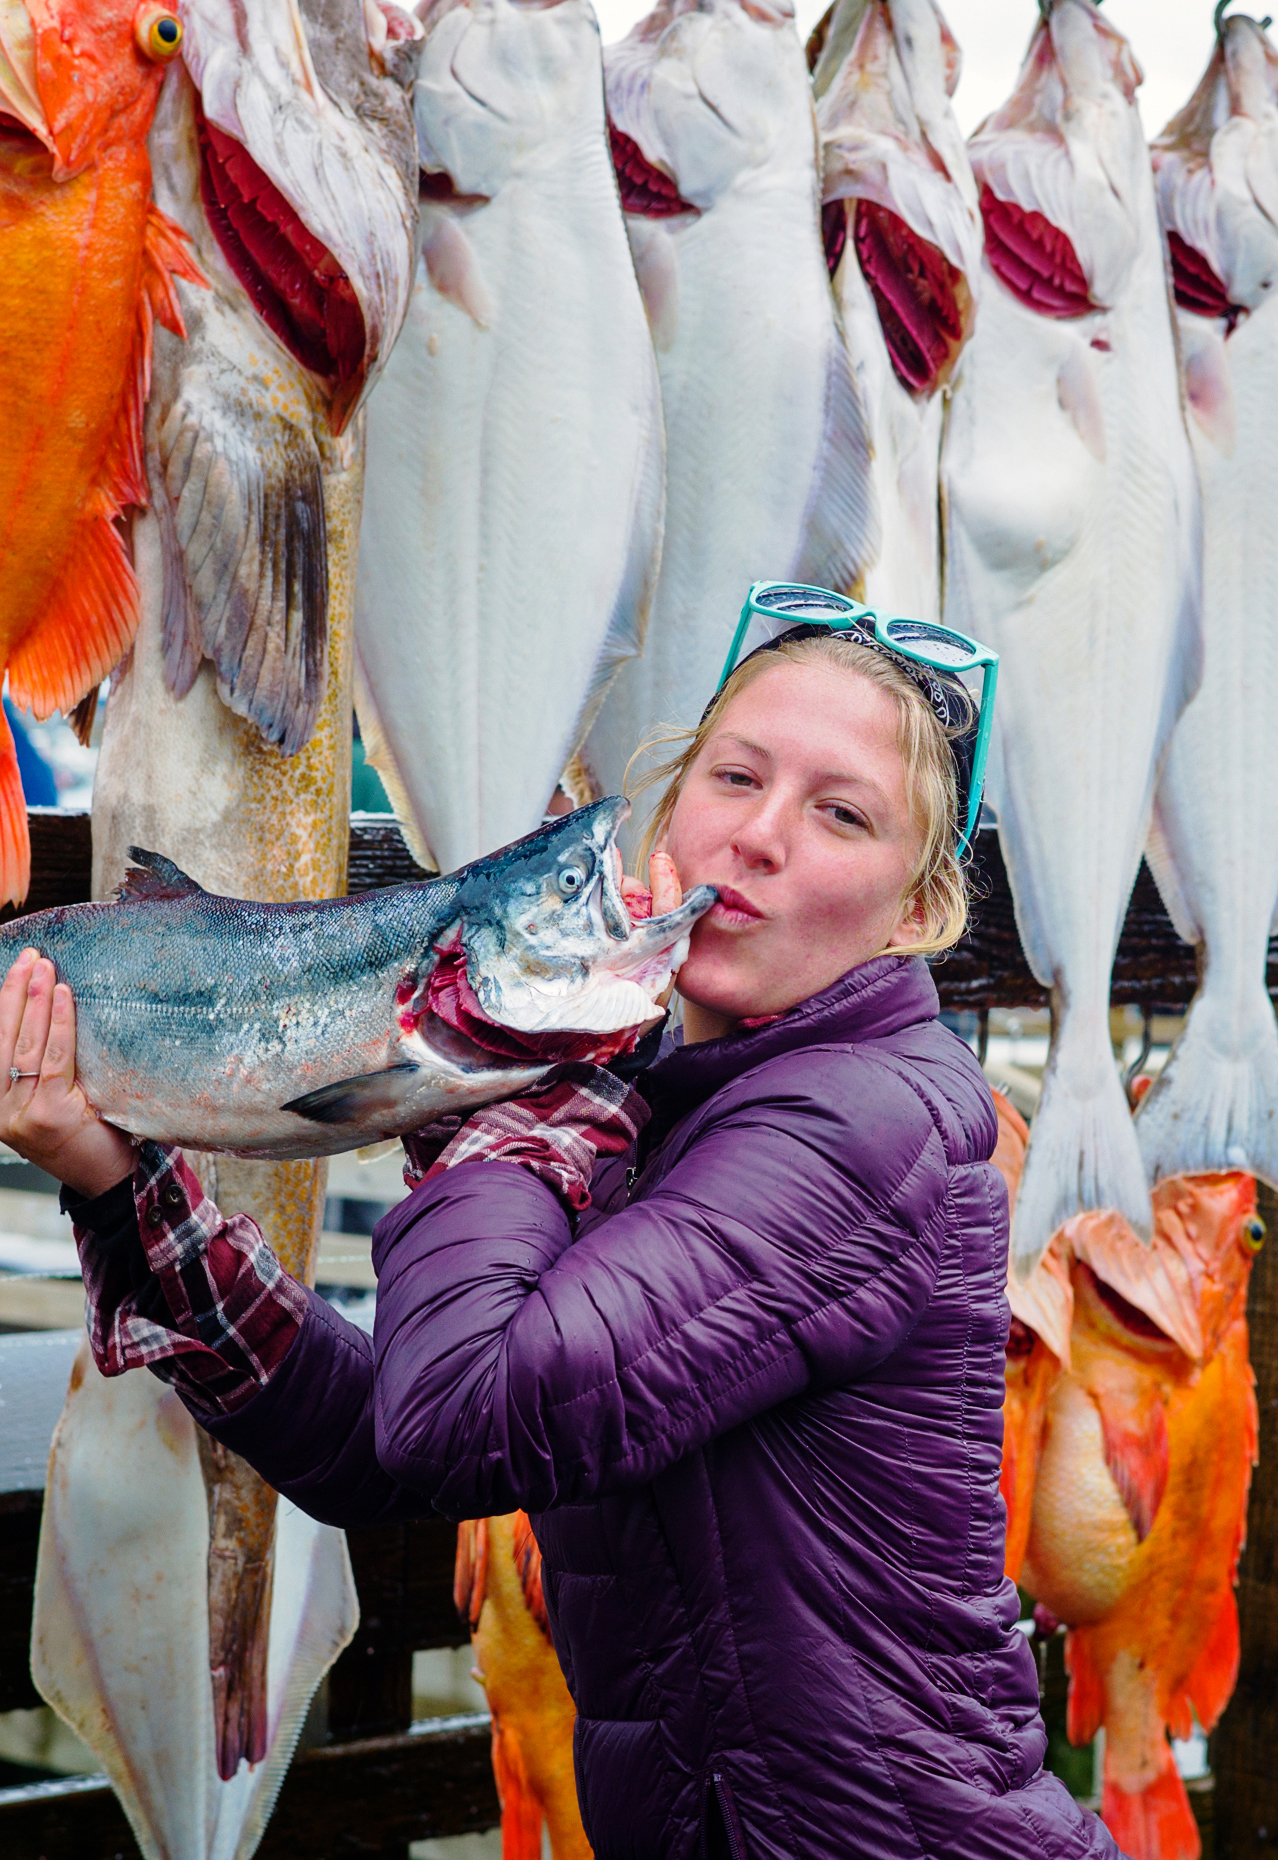 Female fisherman kisses a fish. Charter boat fisherman take photographs of themselves with their fresh catch of the day, Seward, Alaska, USA